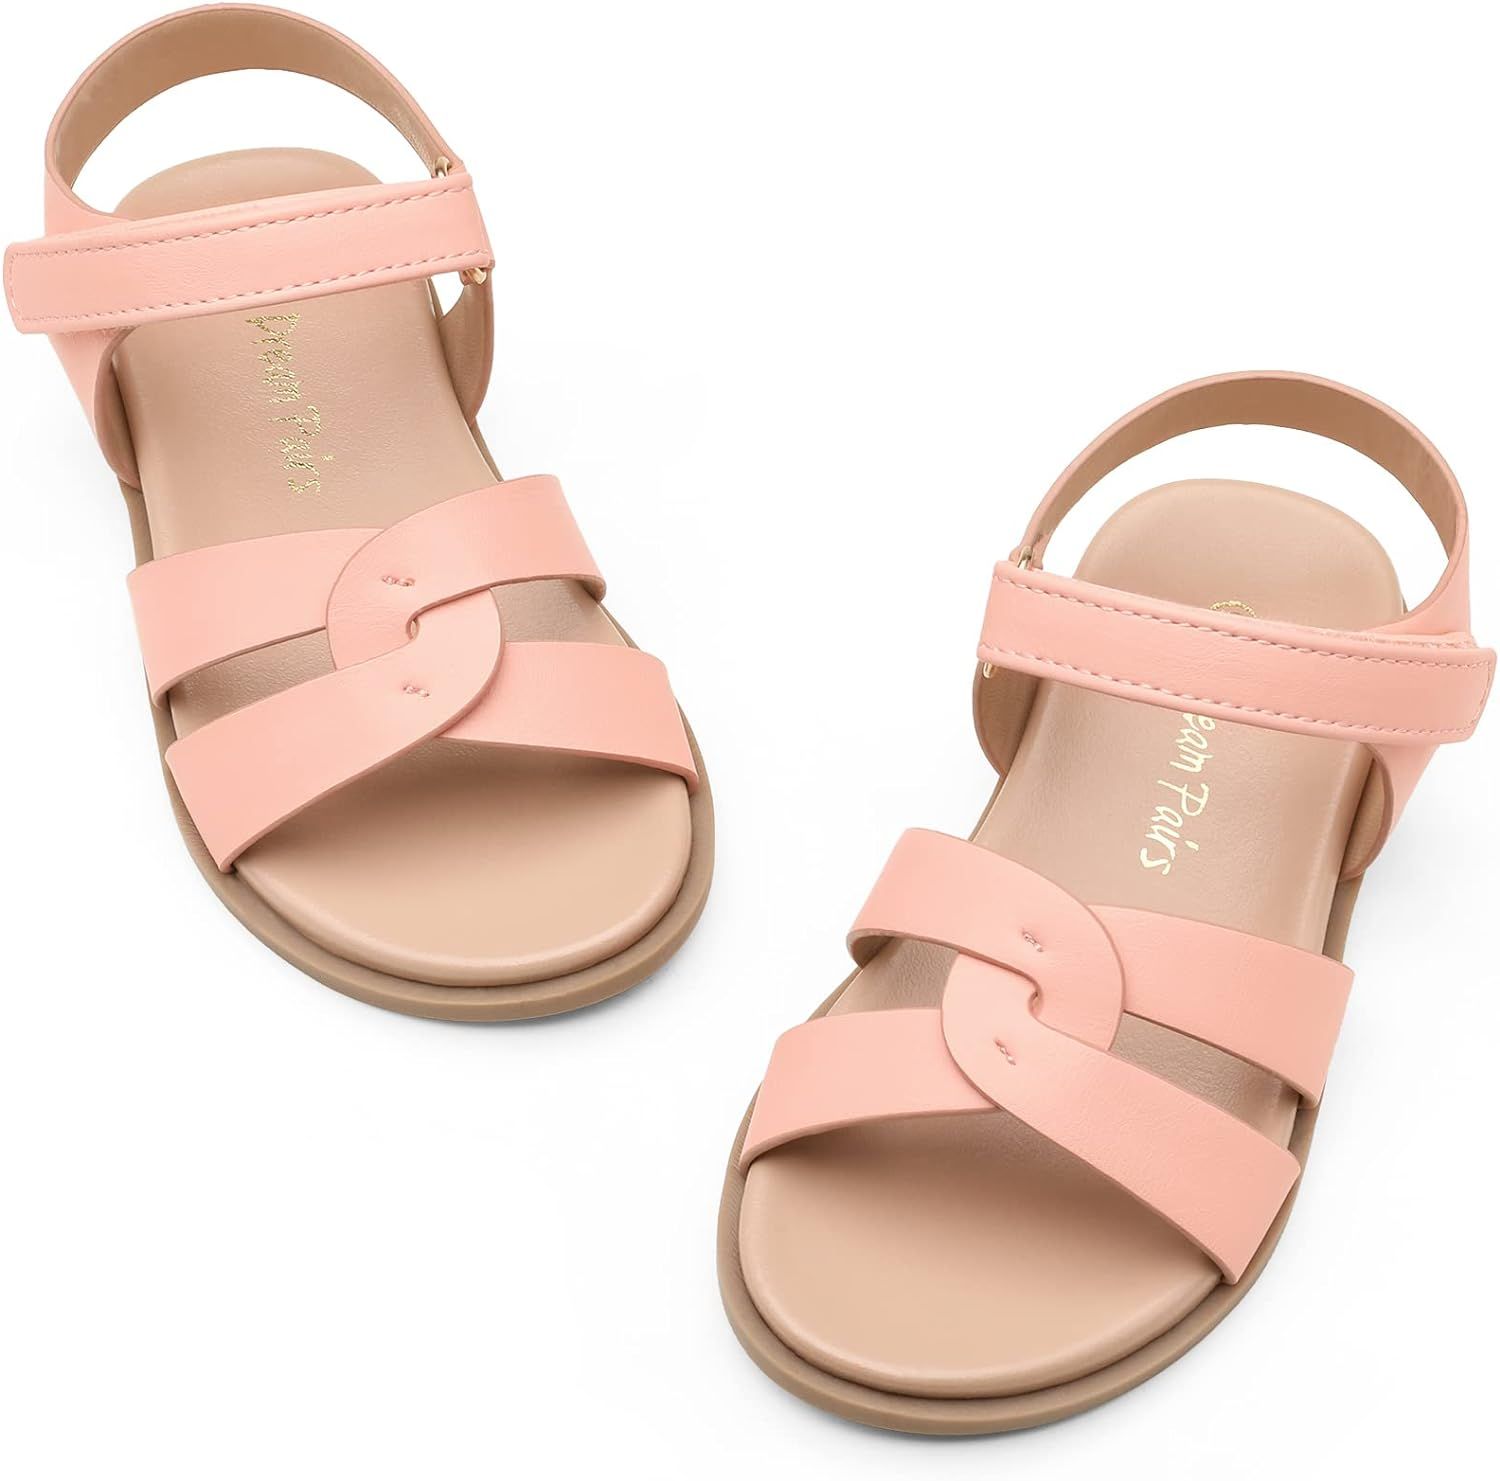 DREAM PAIRS Girls Sandals Open Toe Princess Flat Sandals Strappy Summer Shoes Toddler/Little Kid | Amazon (US)